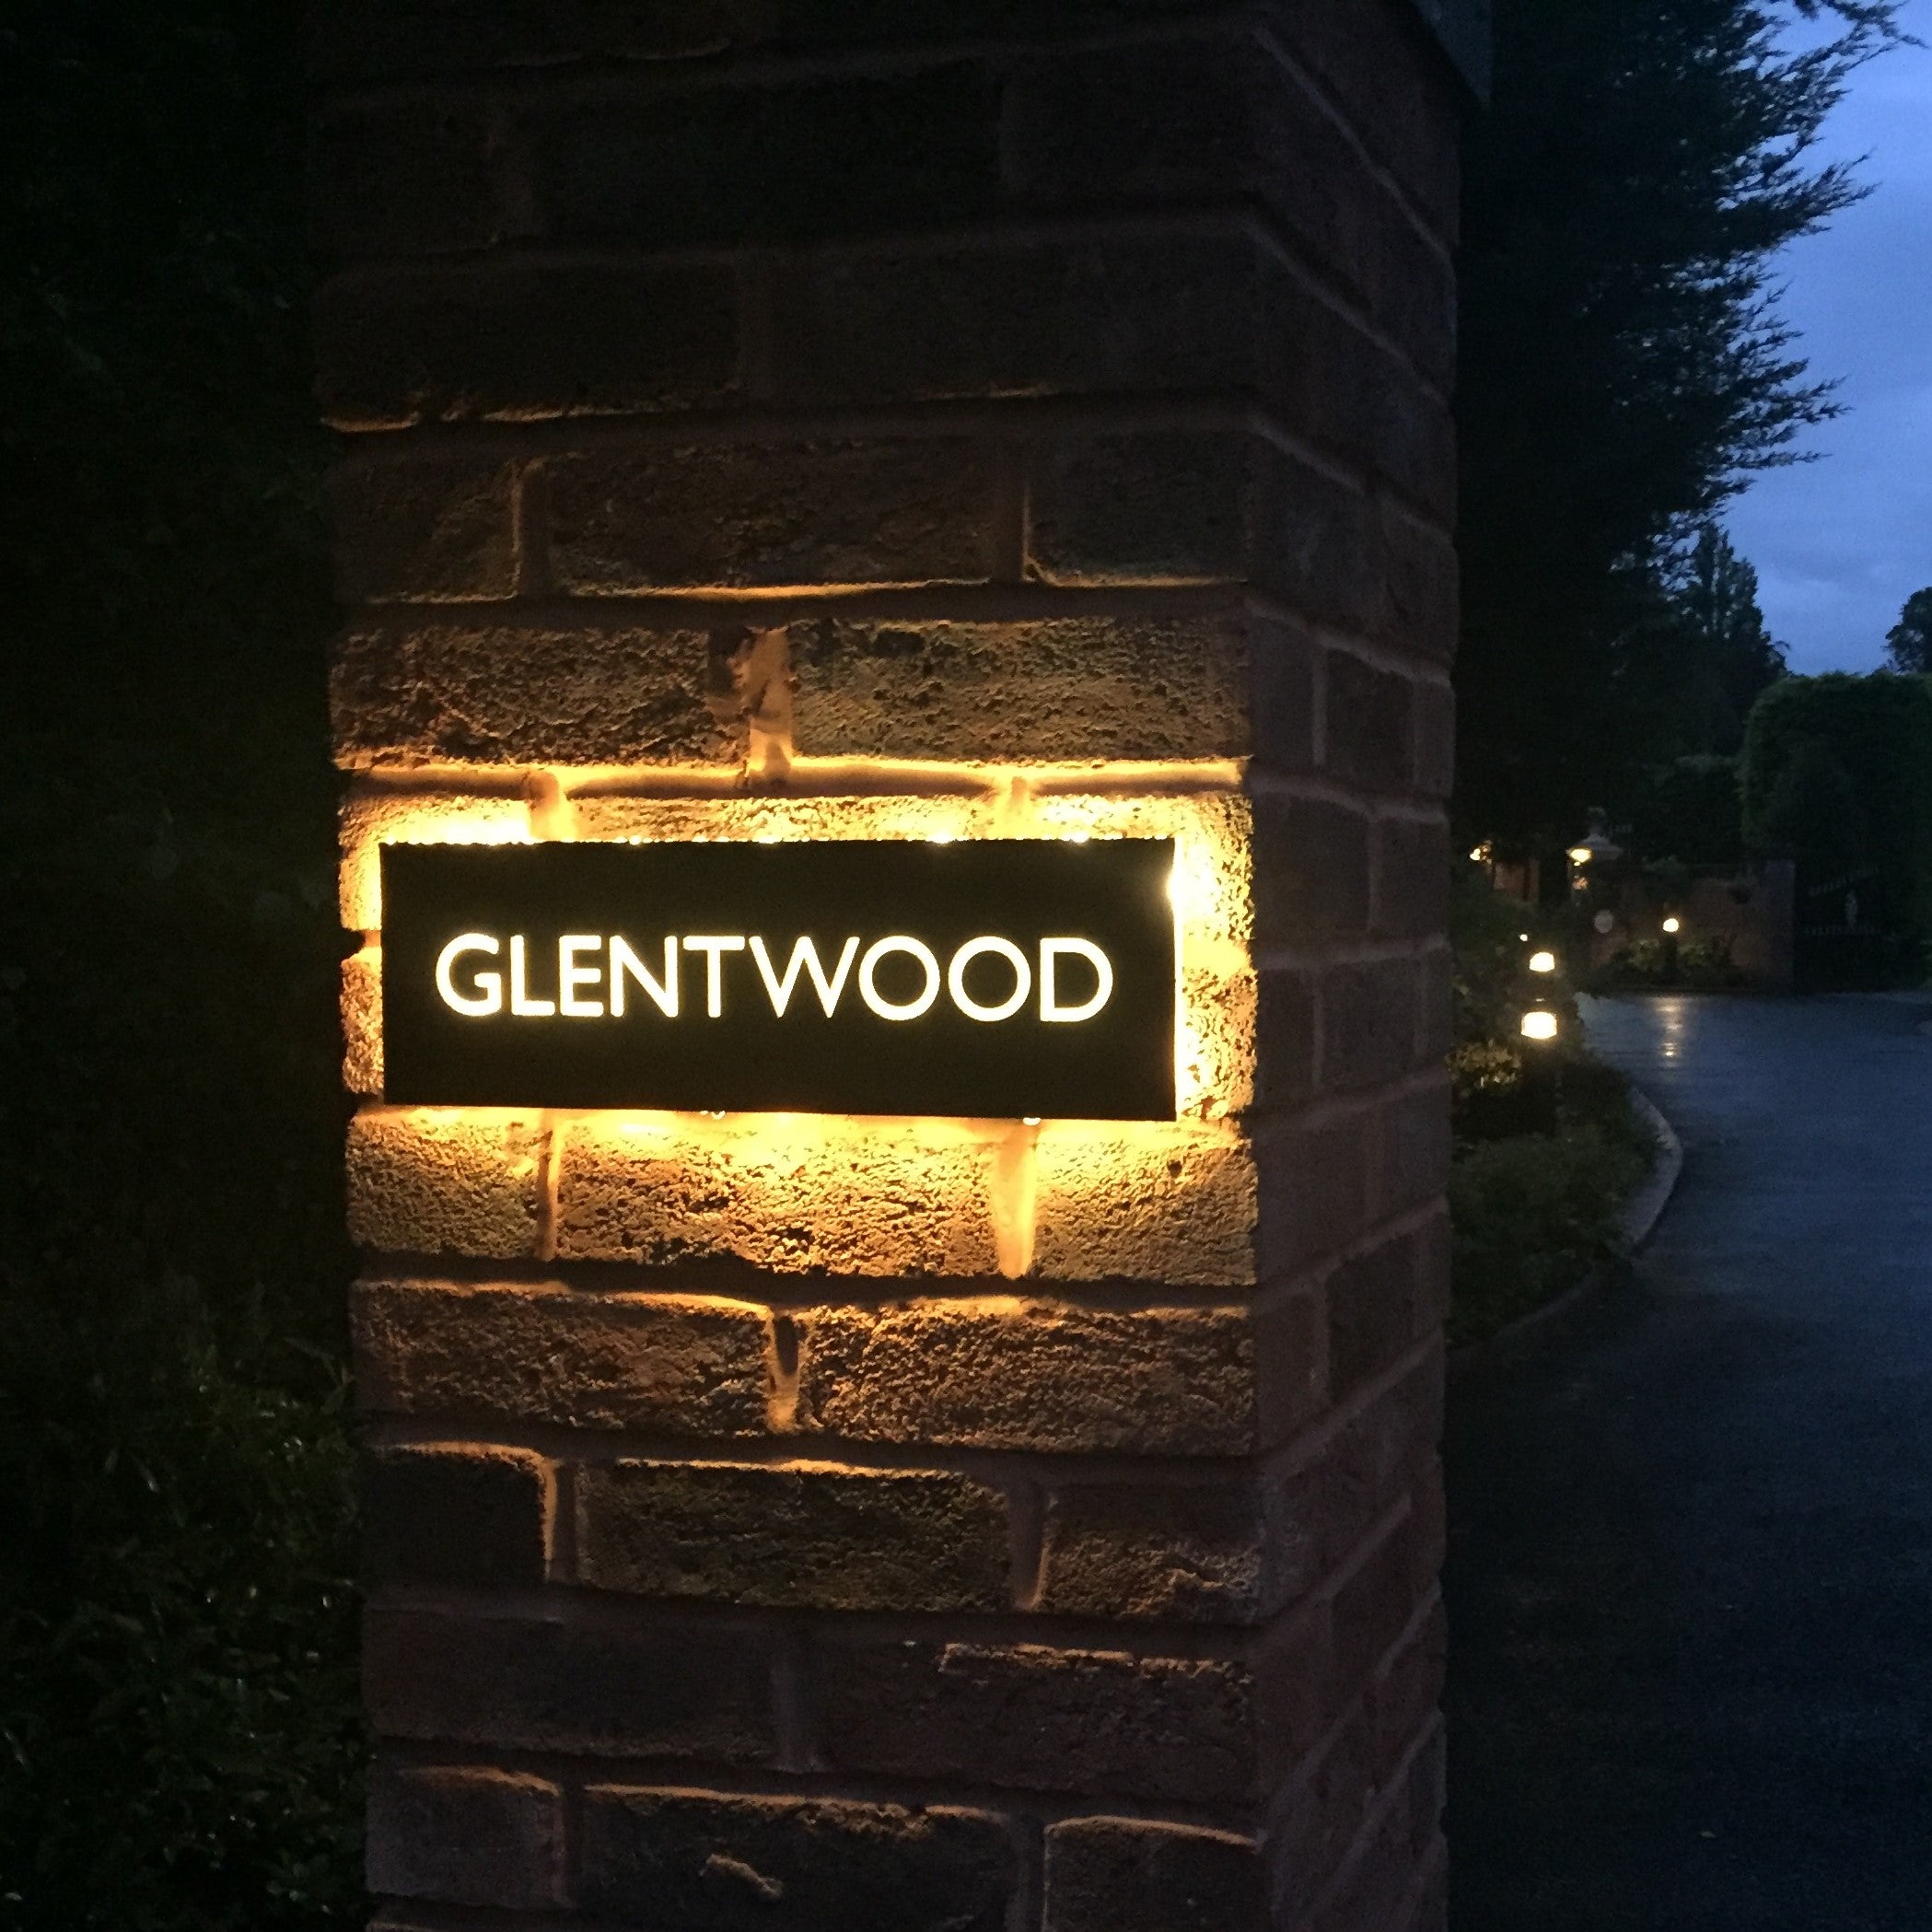 LED House Names, LED Signs, Light up Signs with LEDs, british made LED House signs. Light up your house with LED House Names made from premium steel in the UK. Address signs with LEDs, light up House Name  made from stainless steel or powder coated